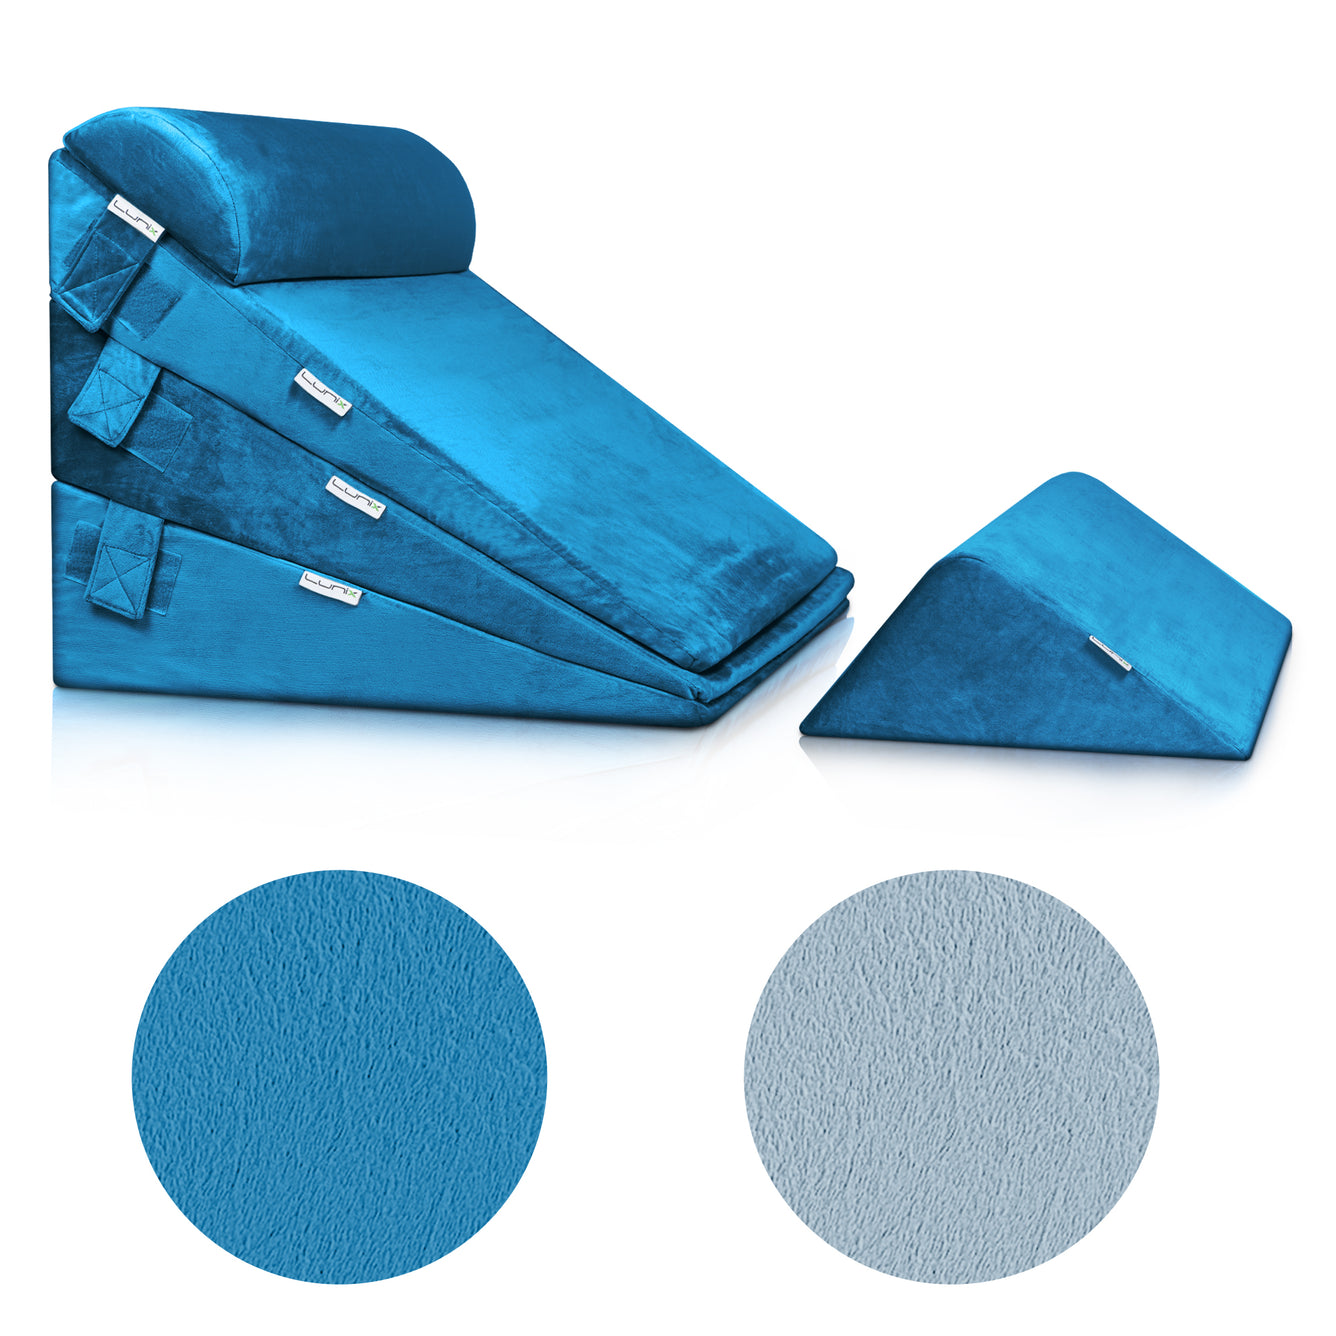 Cover Set Only for LX11, Blue, Pillows and Foam not Included